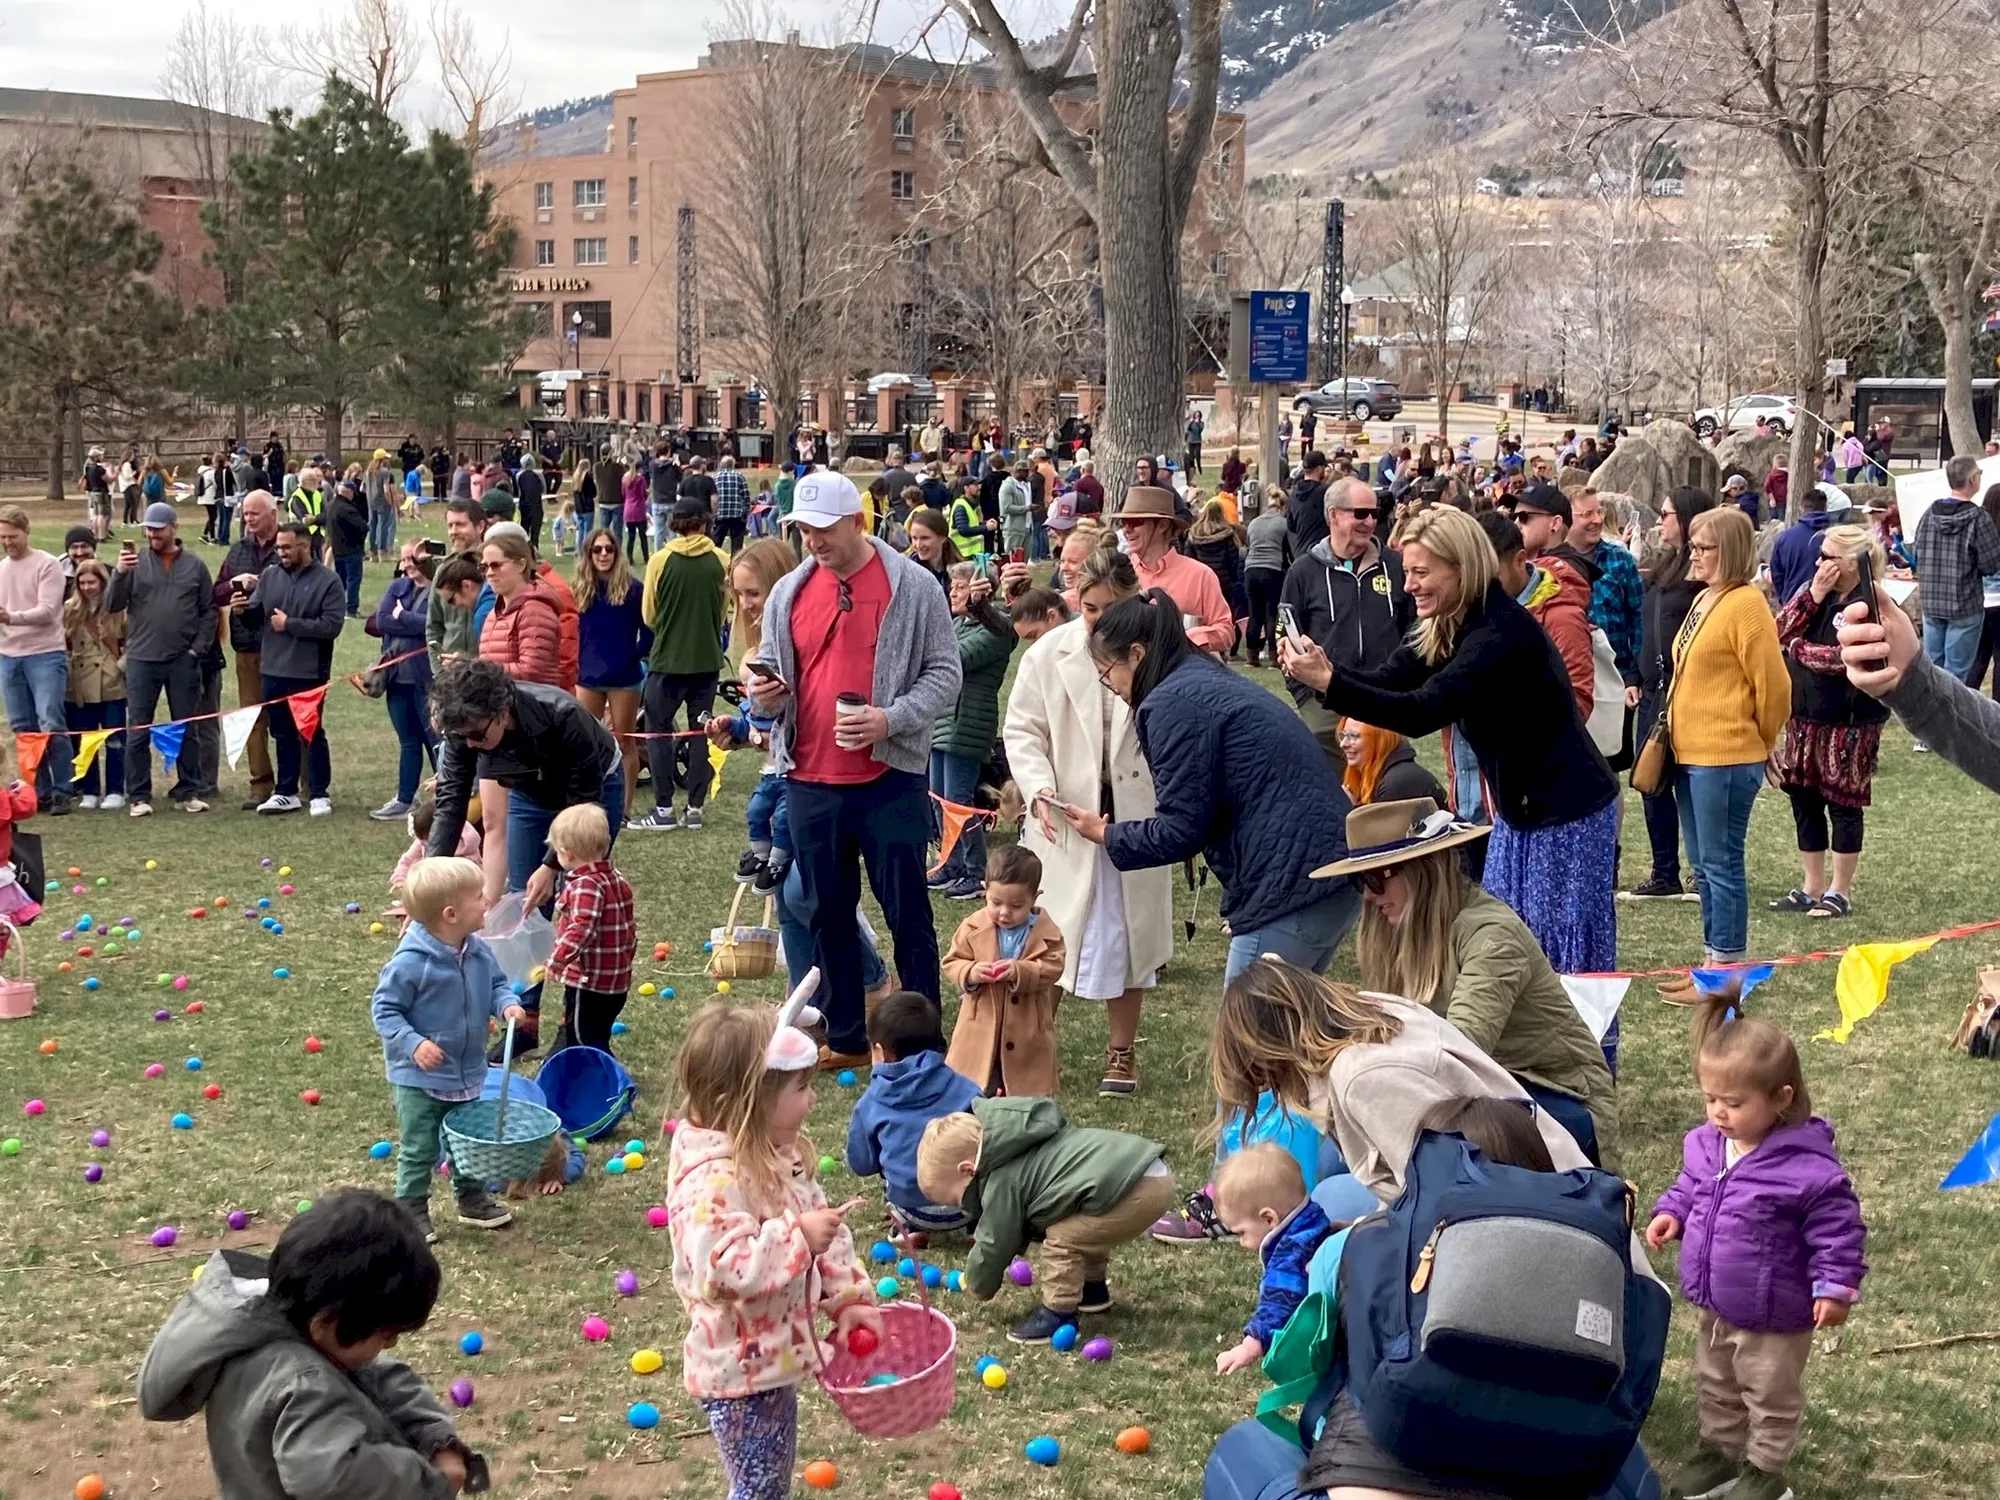 Very young children hunting for colorful plastic Easter eggs in Parfet Park.  Many adults with cameras.